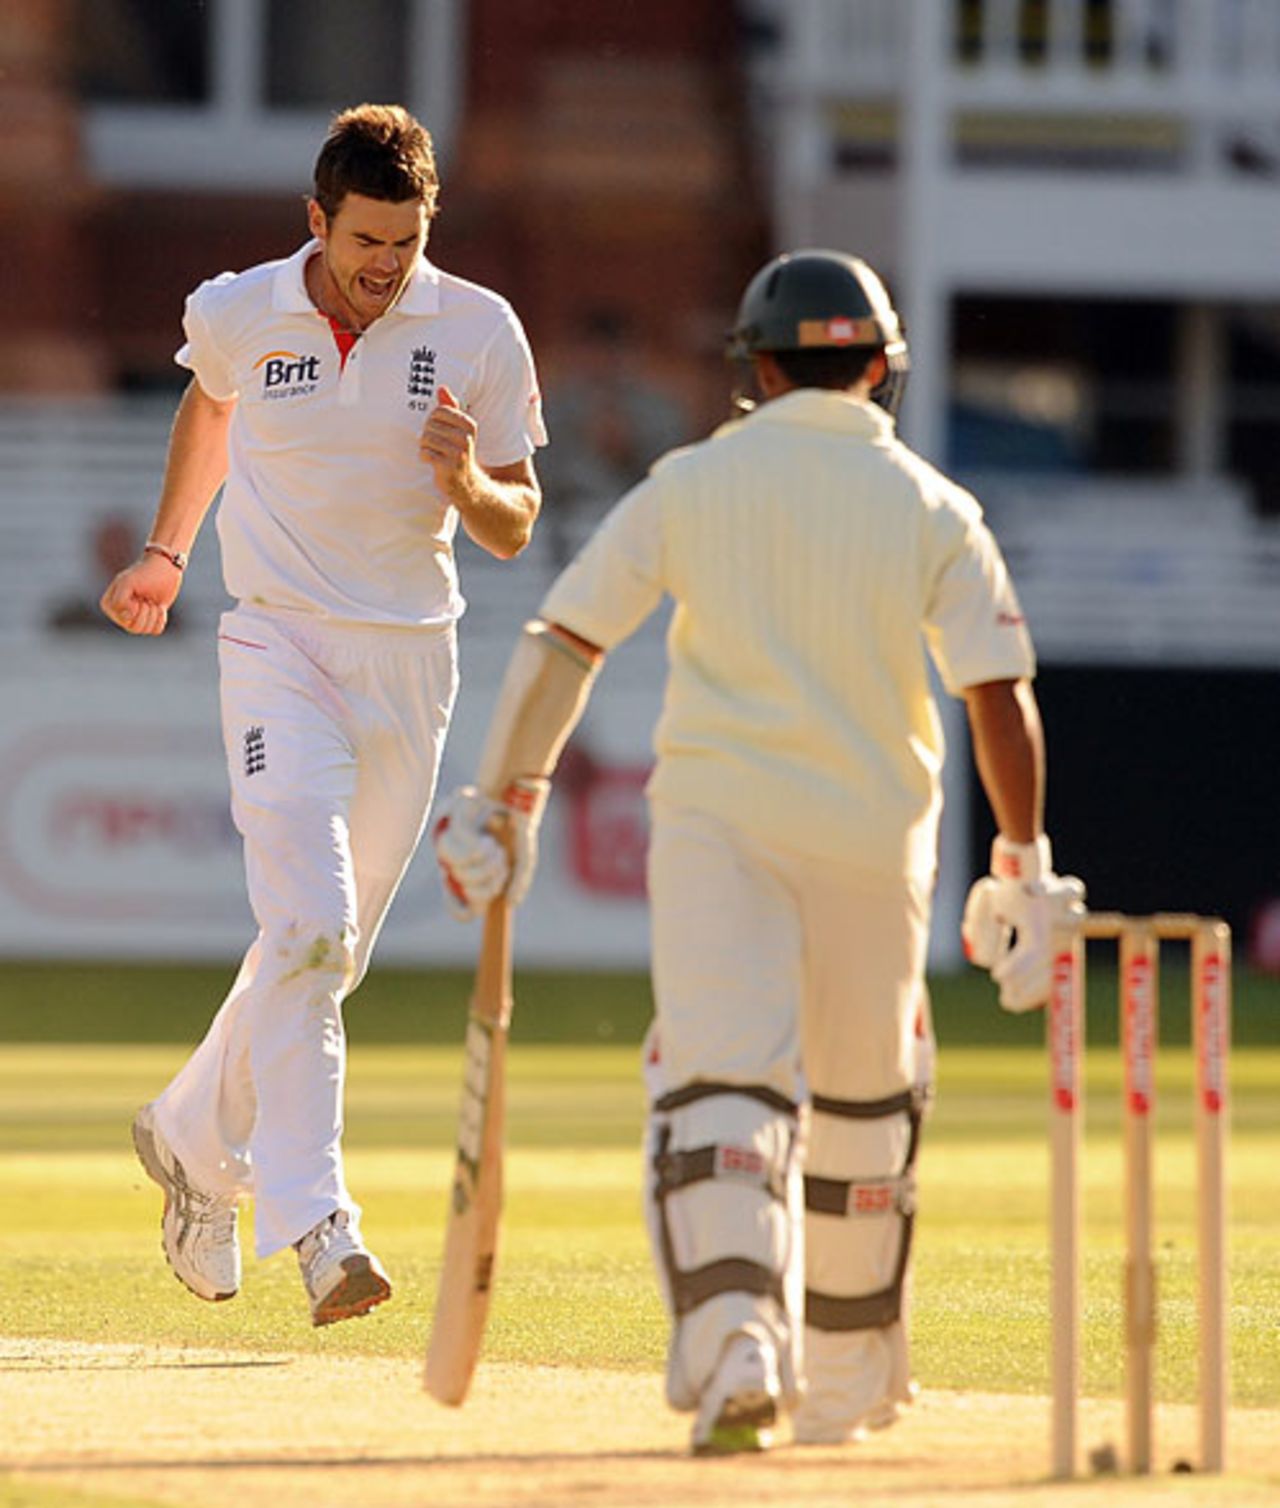 James Anderson removed Mohammad Ashraful in the evening sunshine, England v Bangladesh, 1st Test, Lord's, May 30, 2010 
